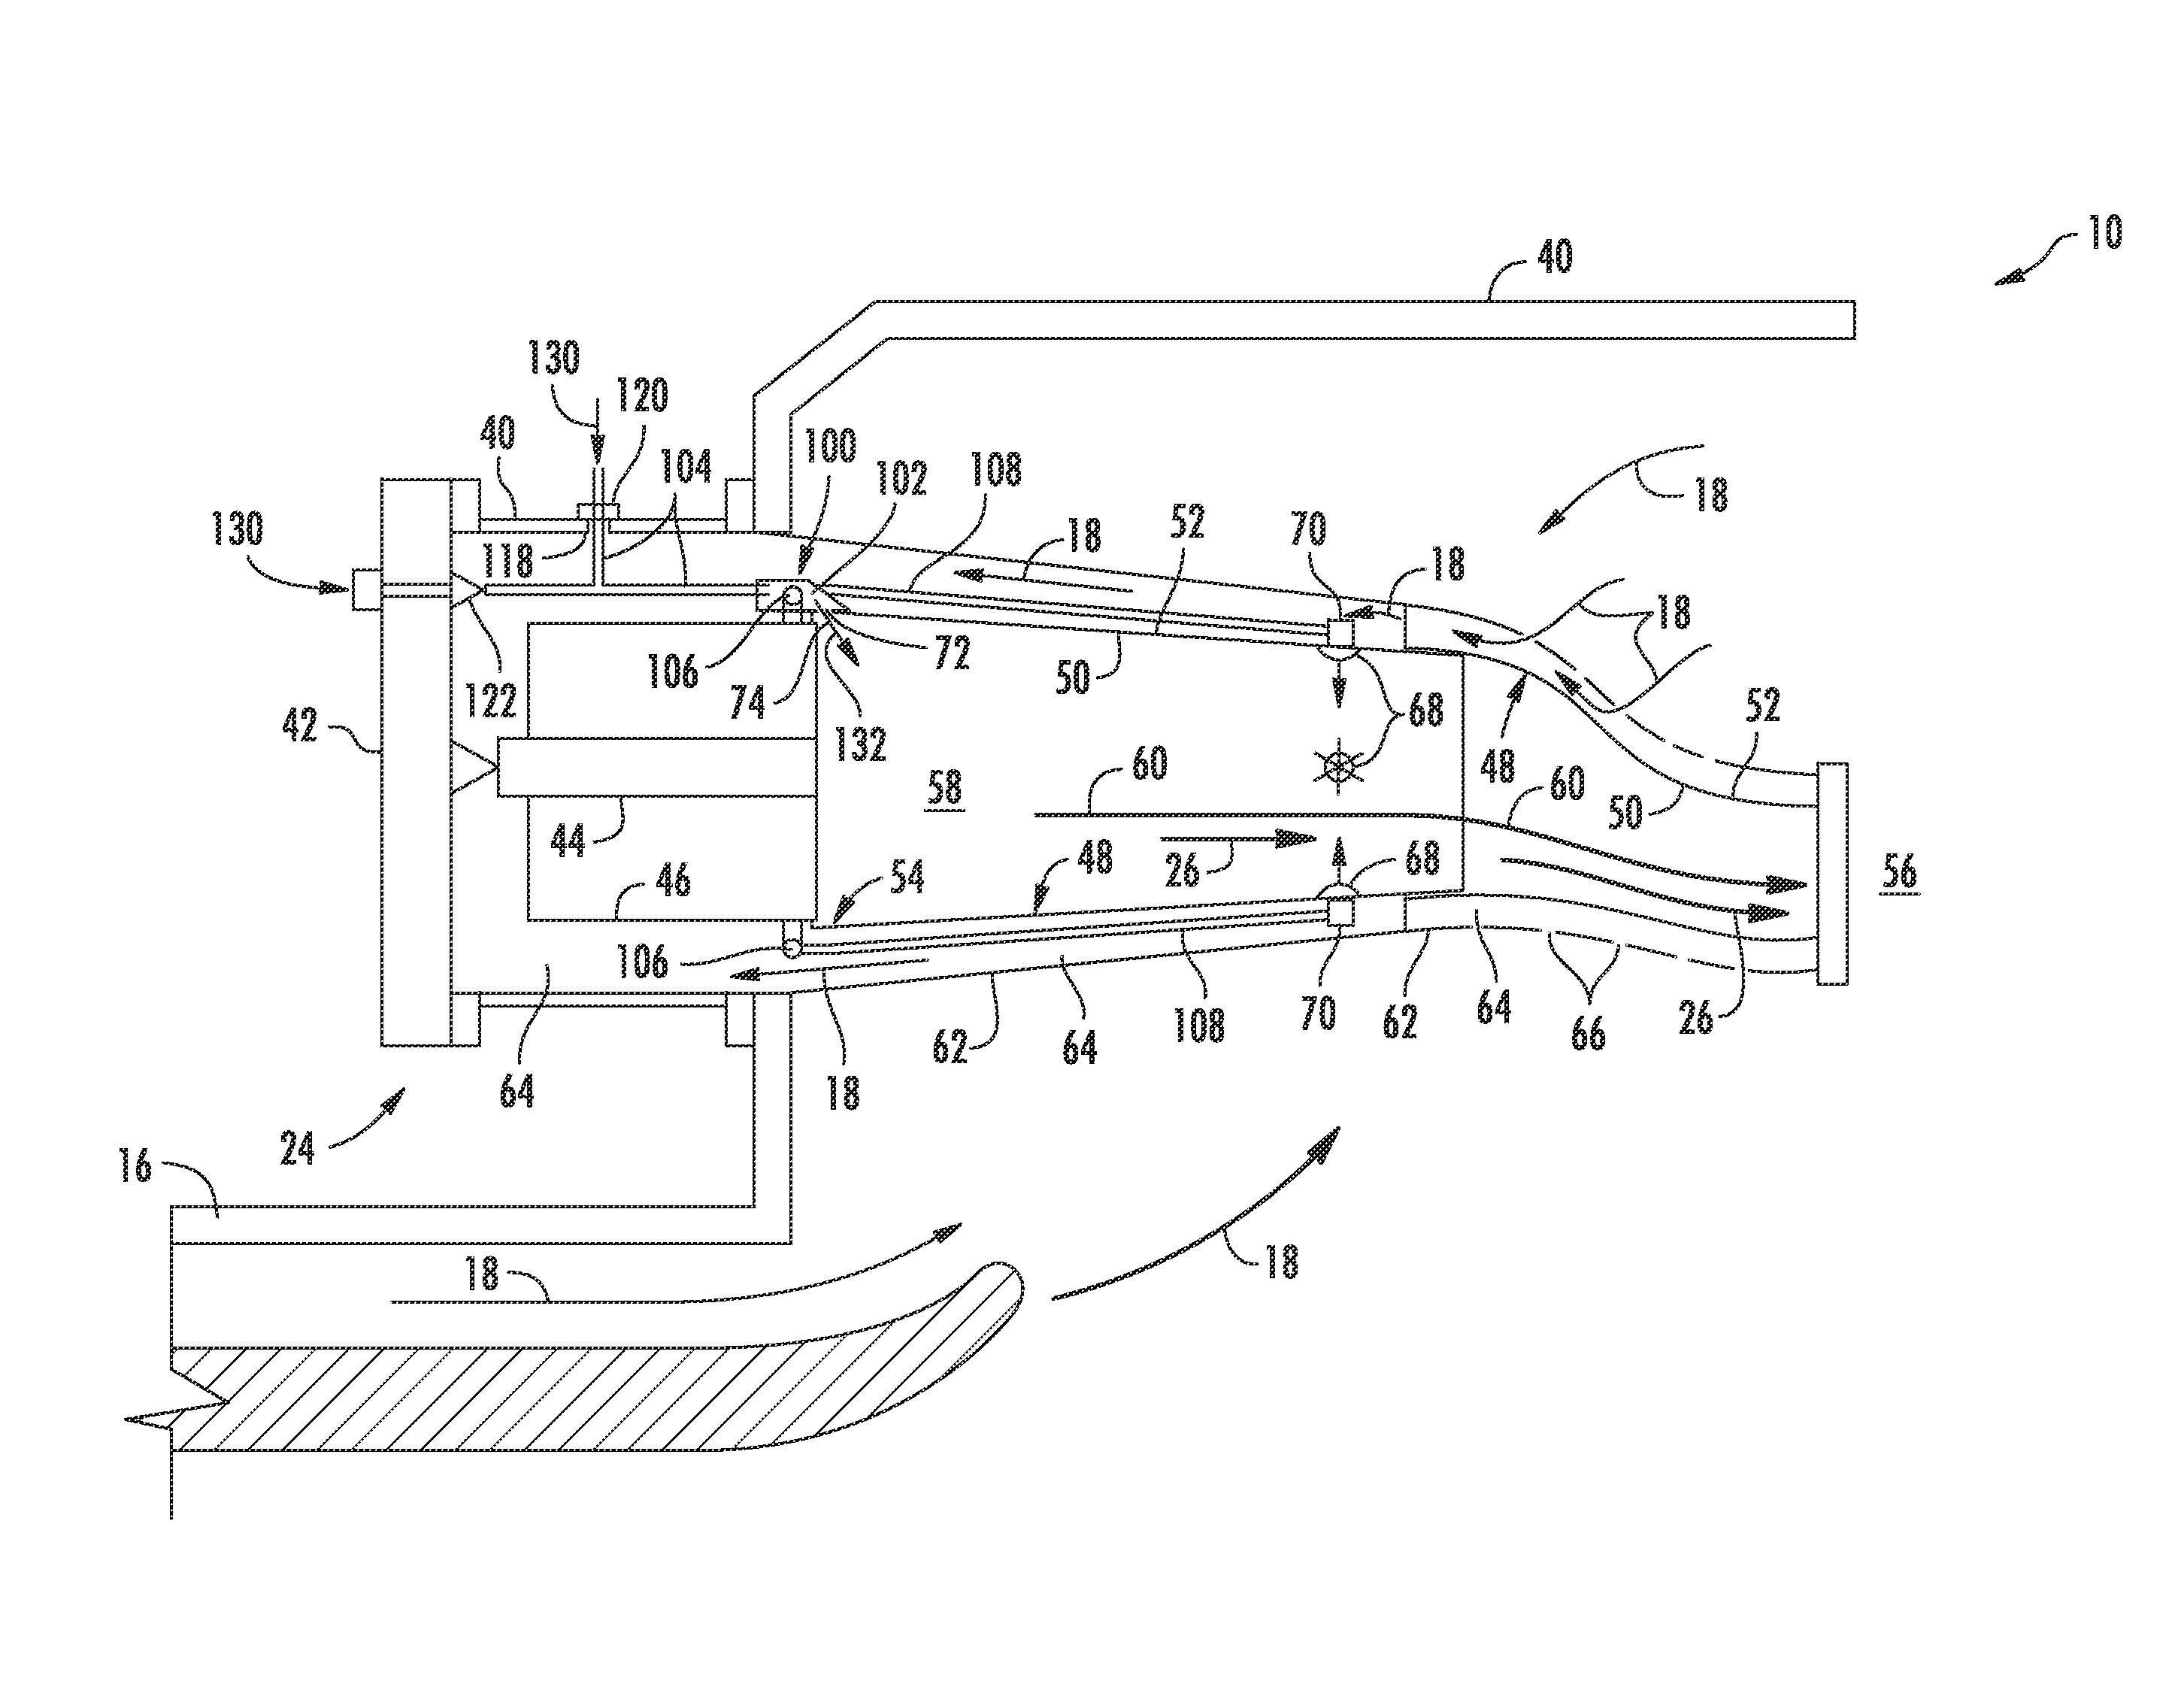 System for providing fuel to a combustor